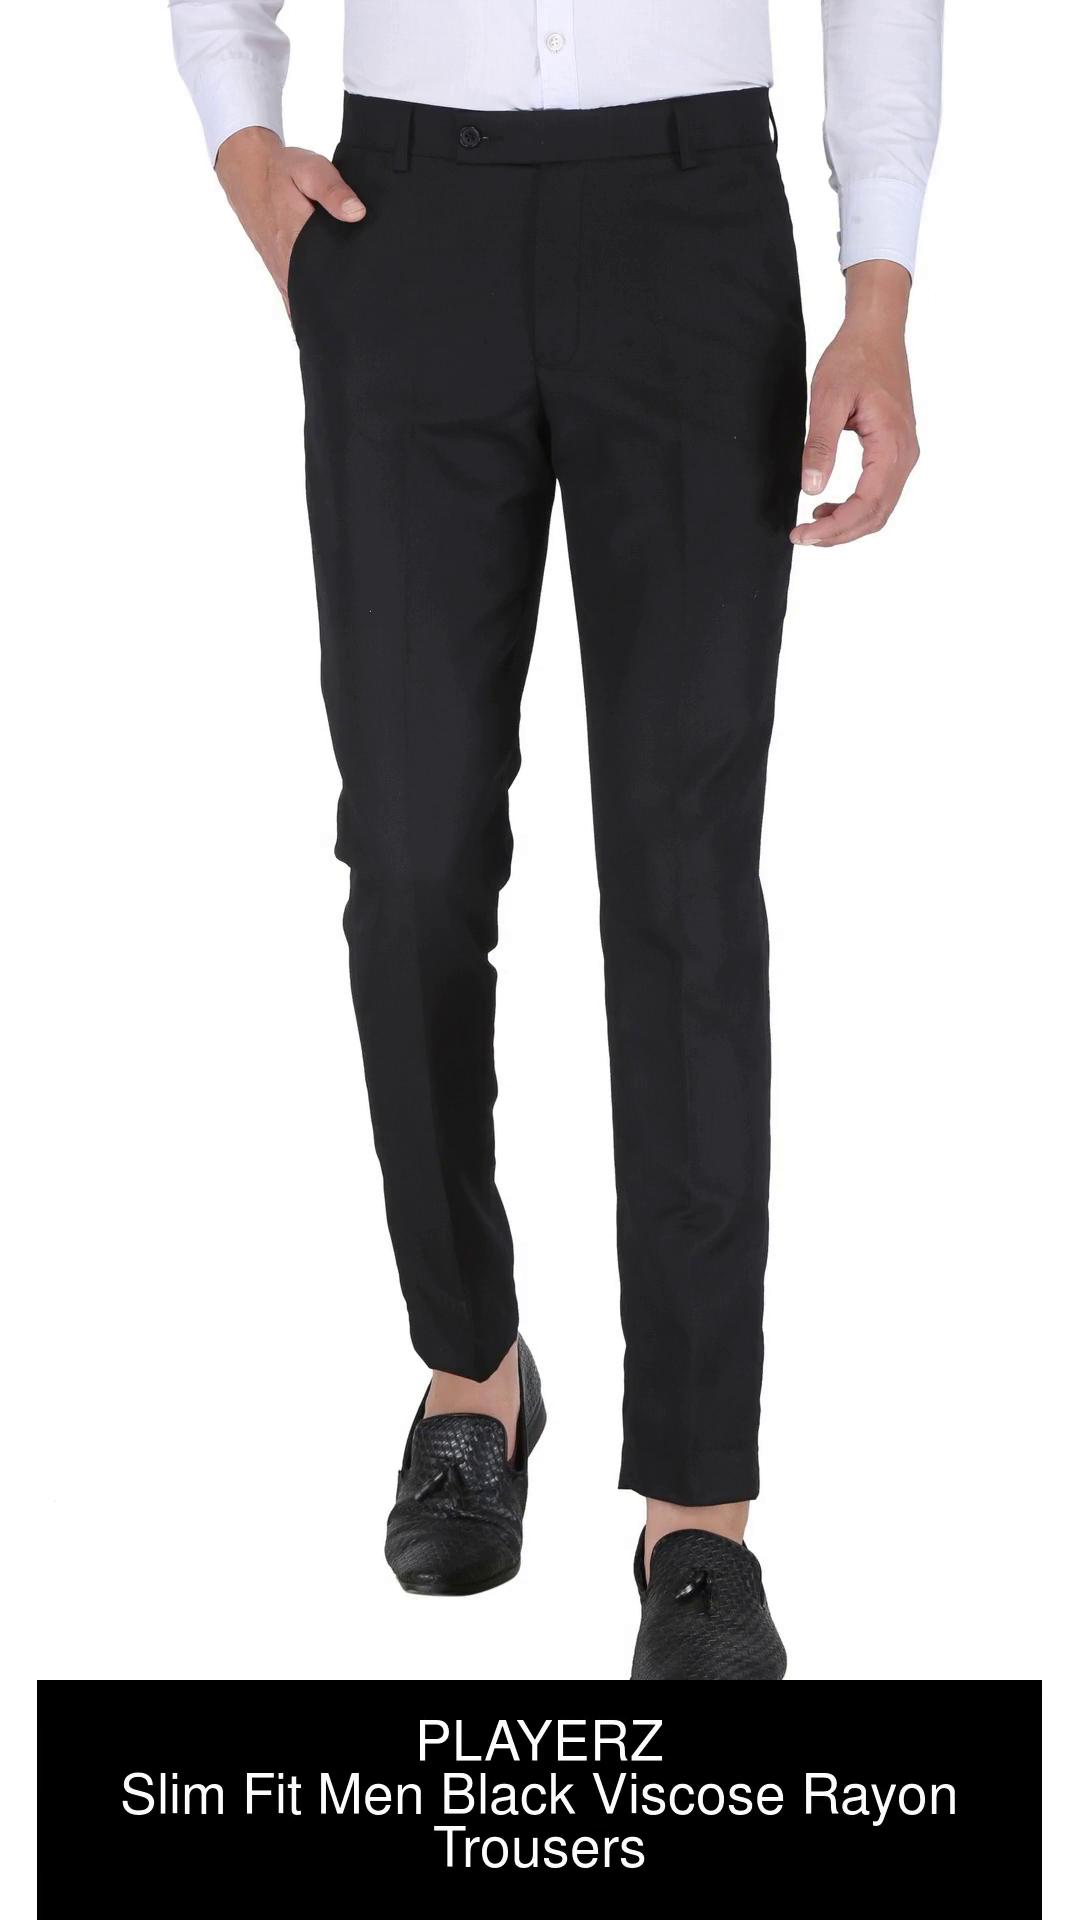 Black All Weather Essential Stretch Pants